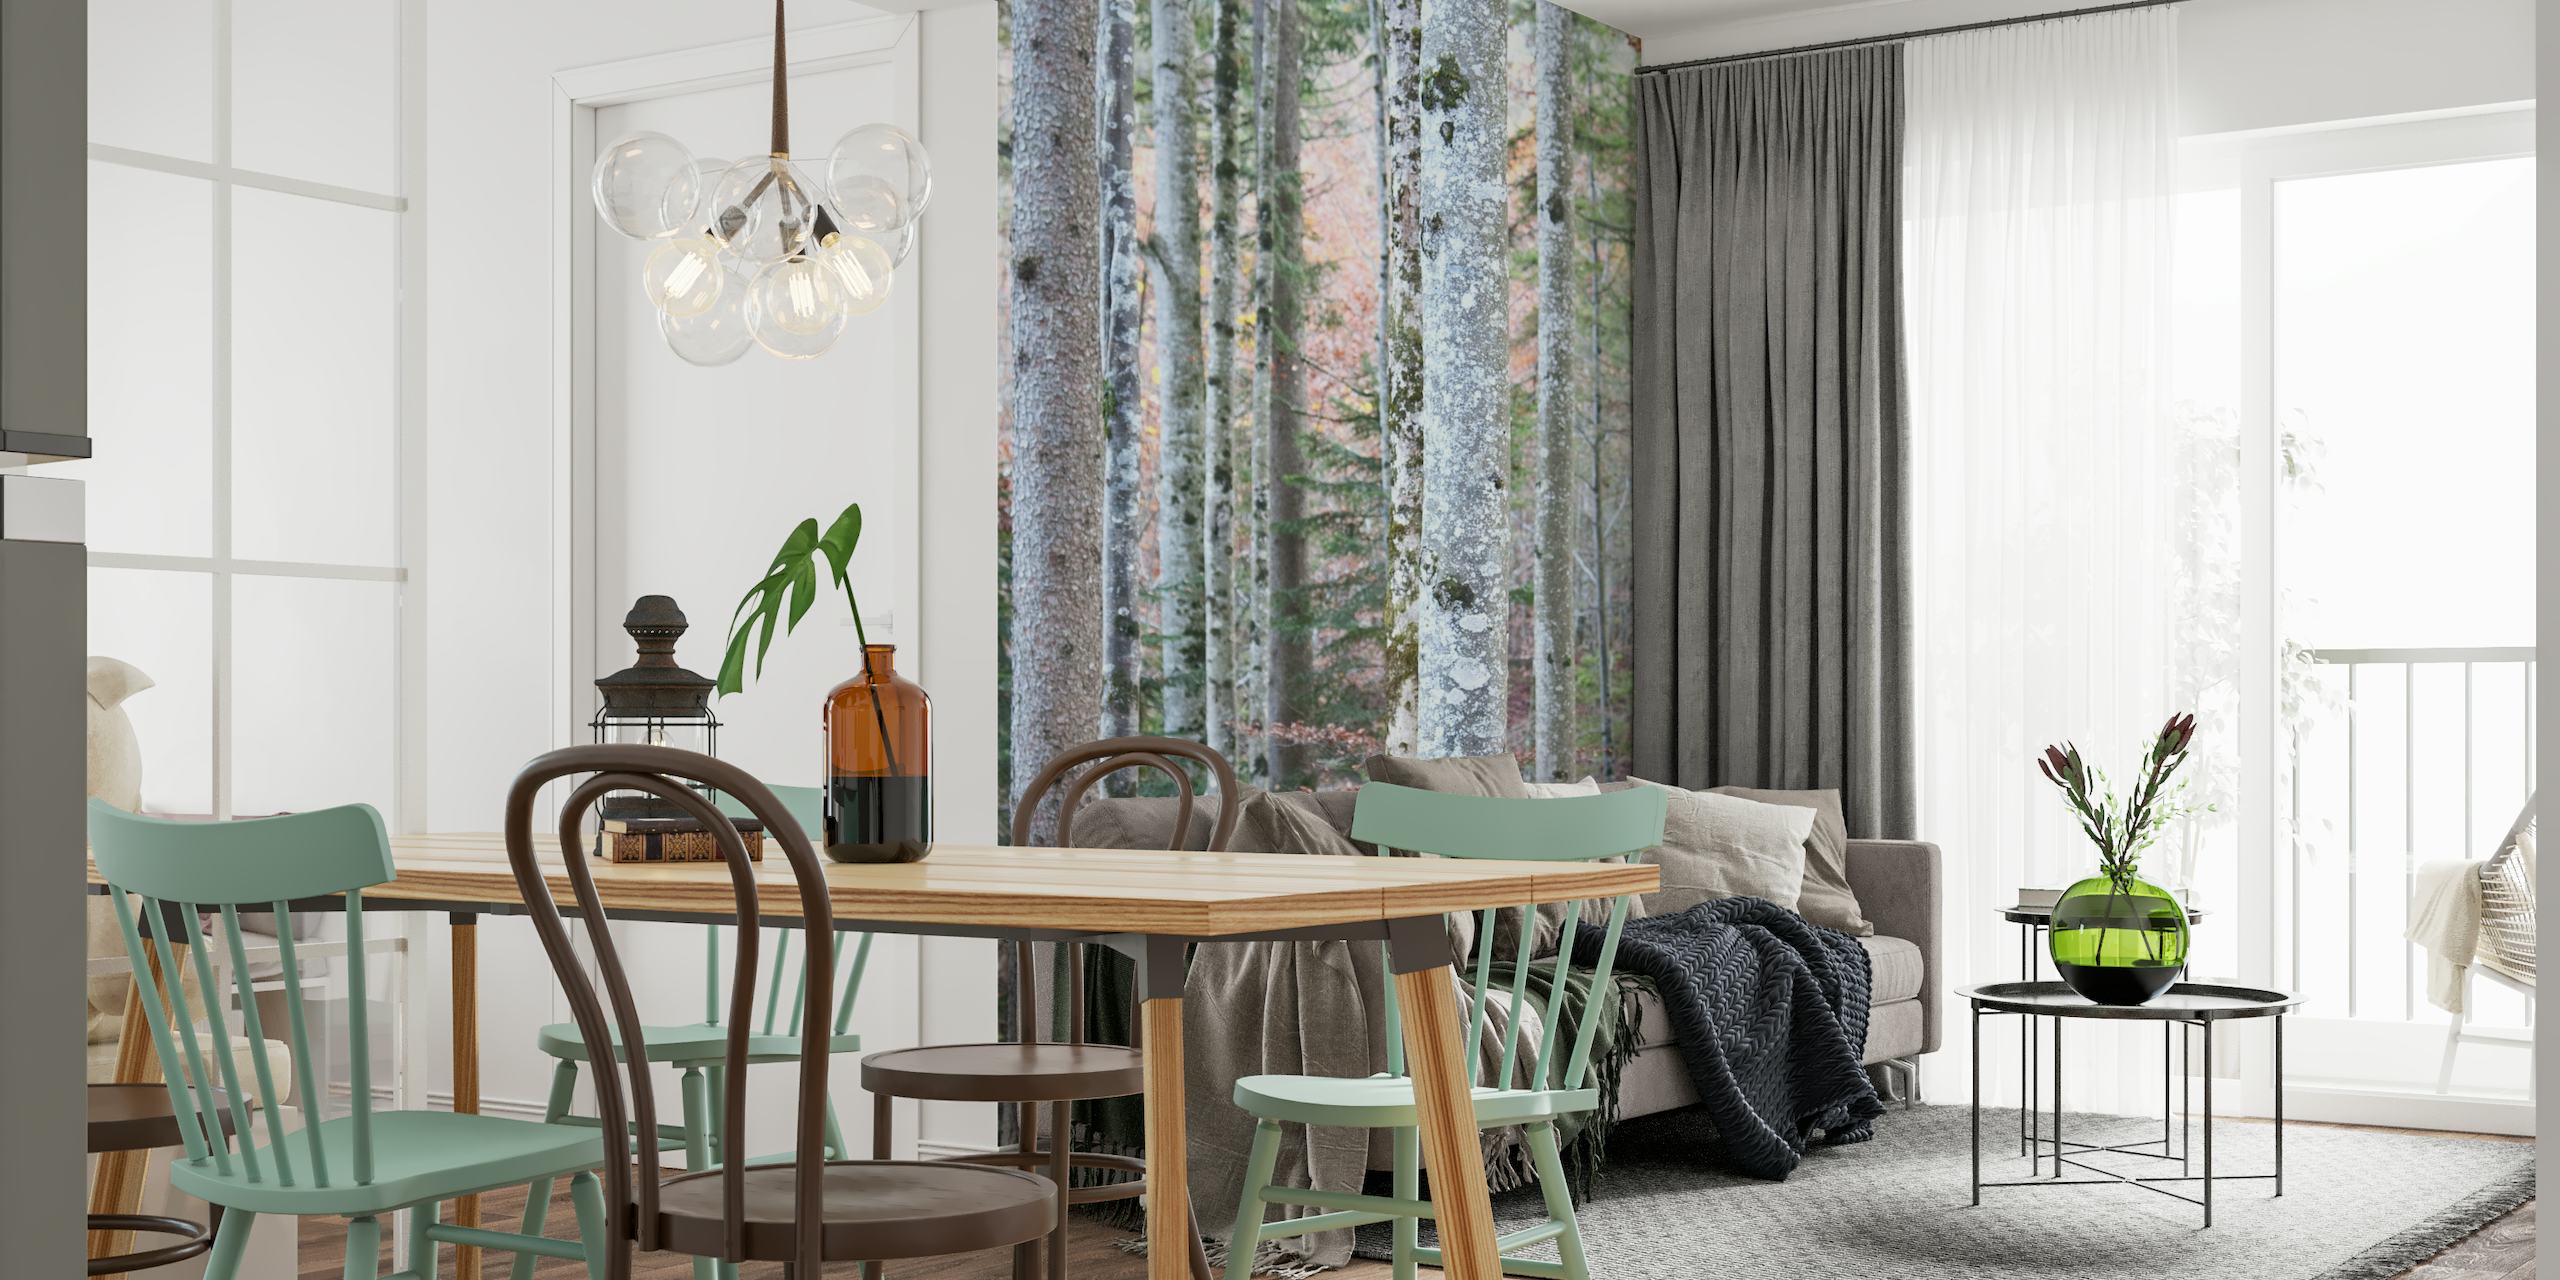 Tranquil forest wall mural showcasing tall trees with textured bark, a natural woodland ambience.